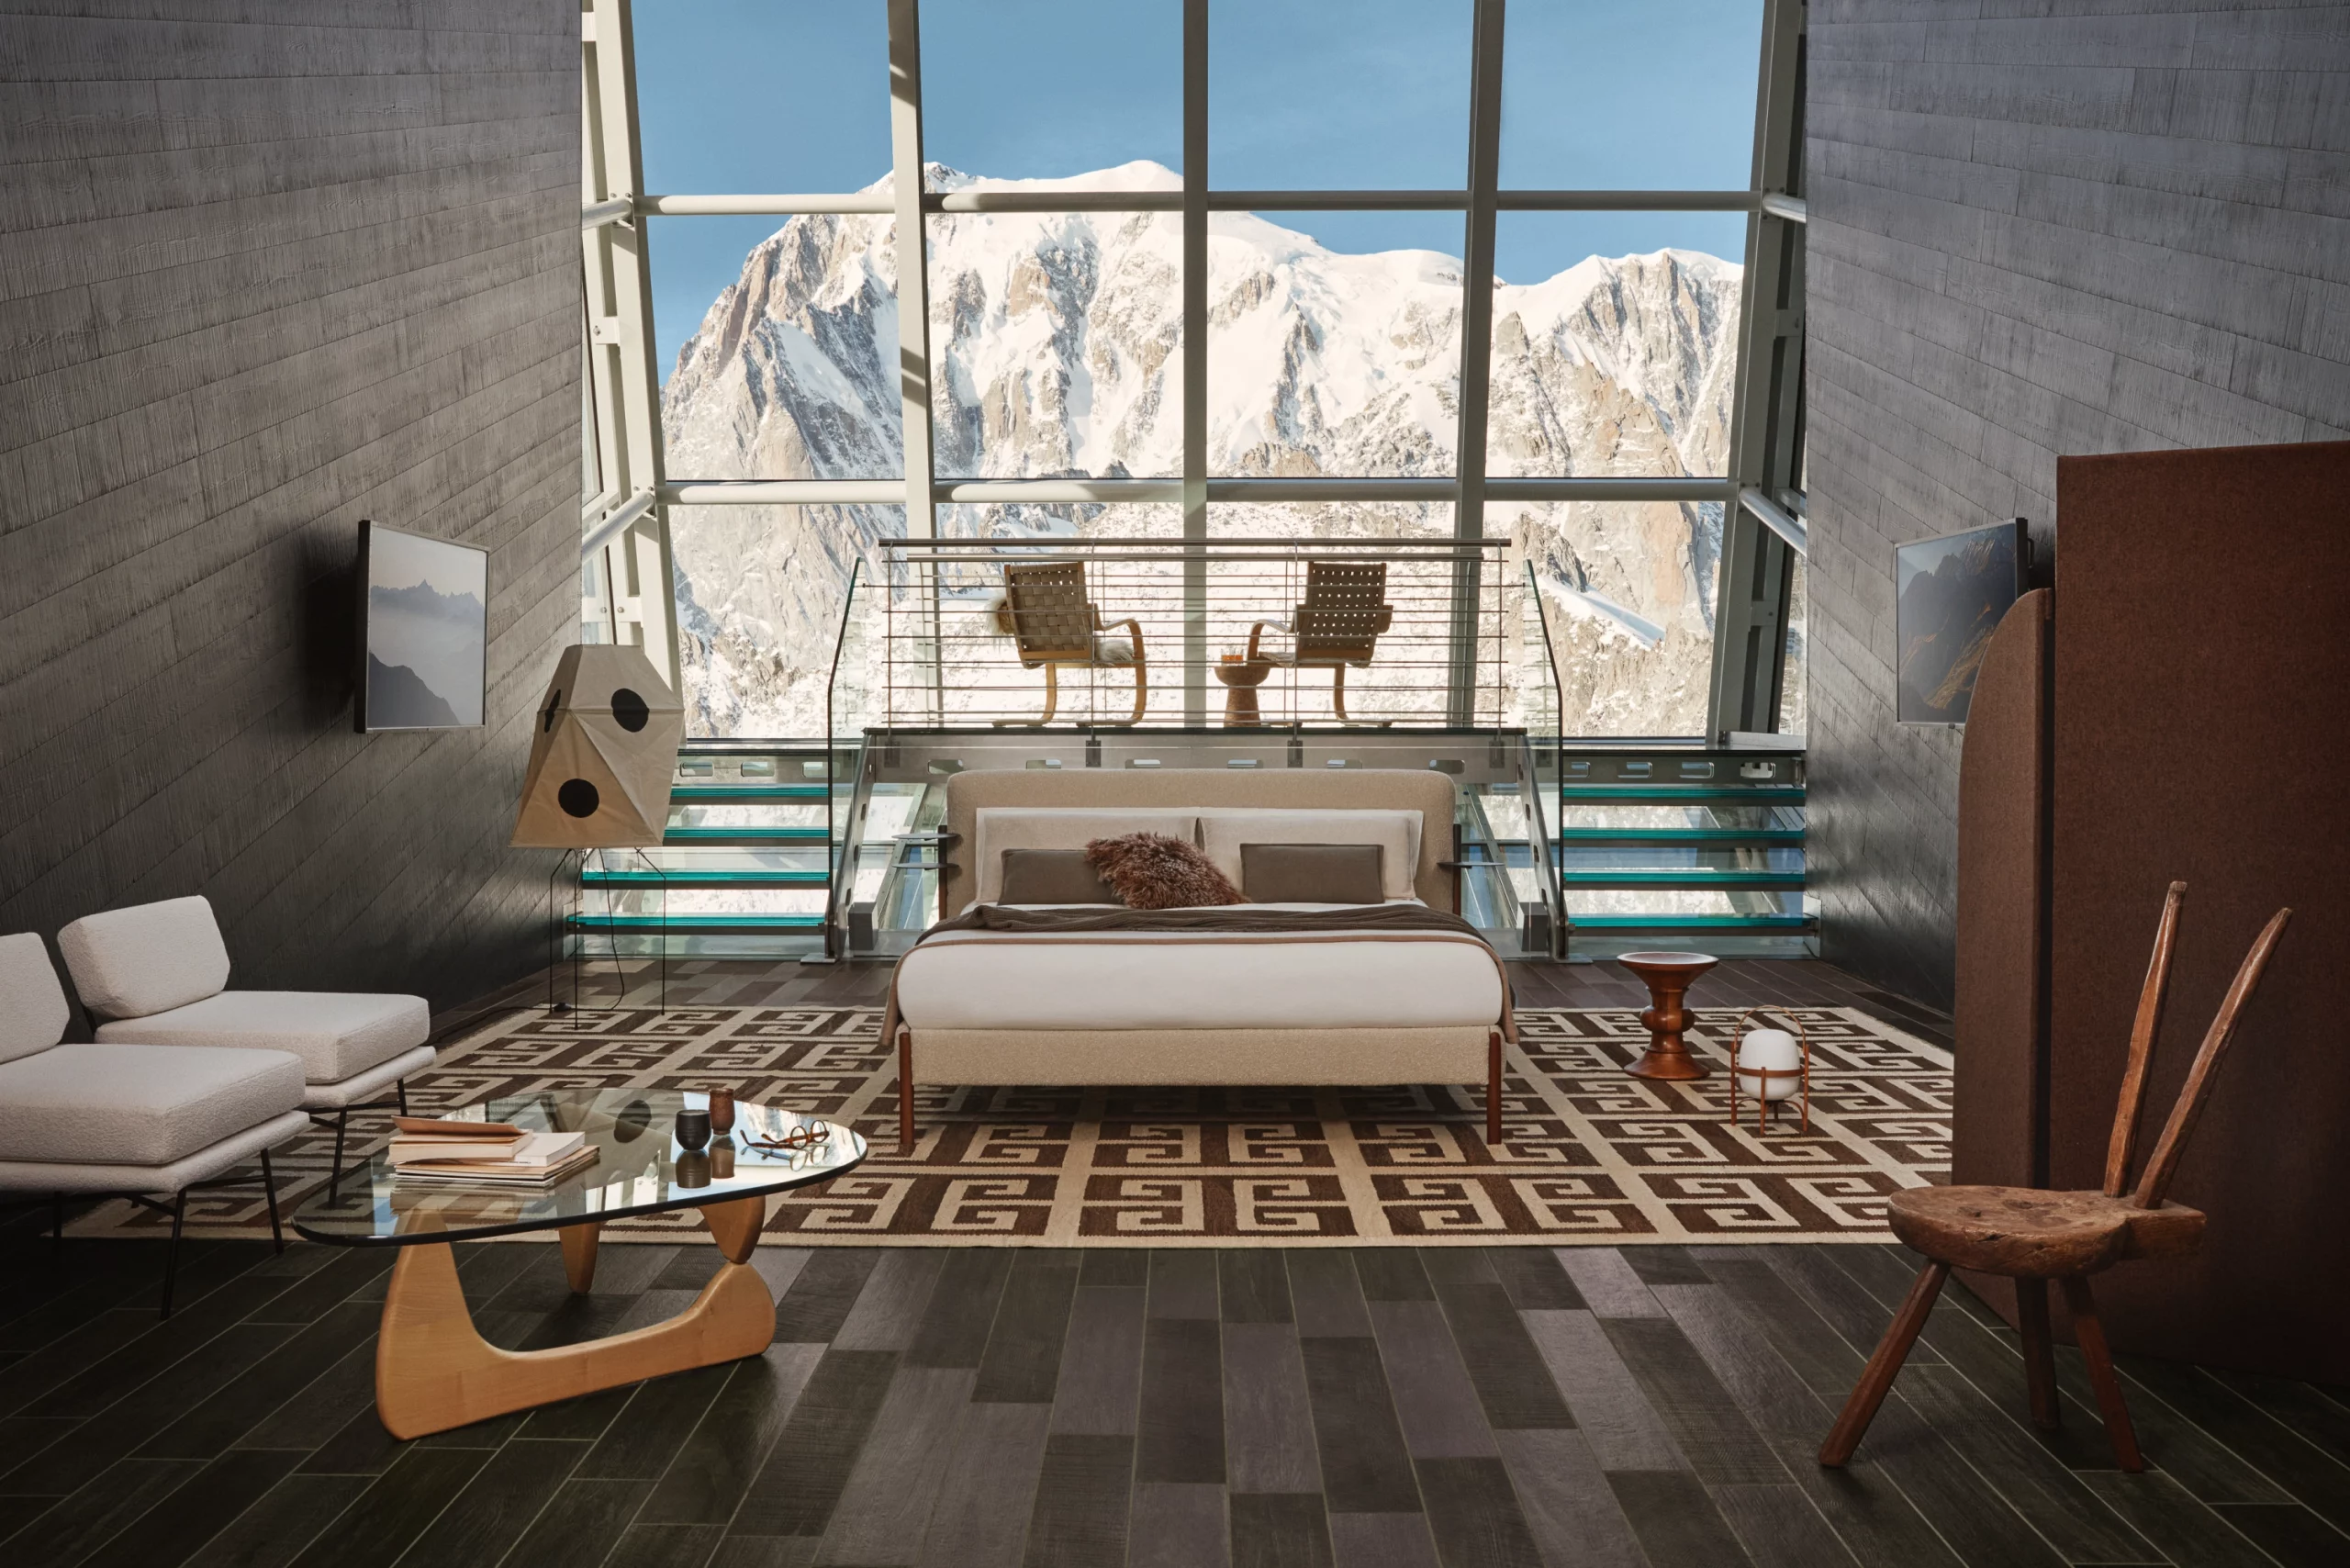 In Mont Blanc, You Can Now Stay At Europe’s Highest Airbnb!